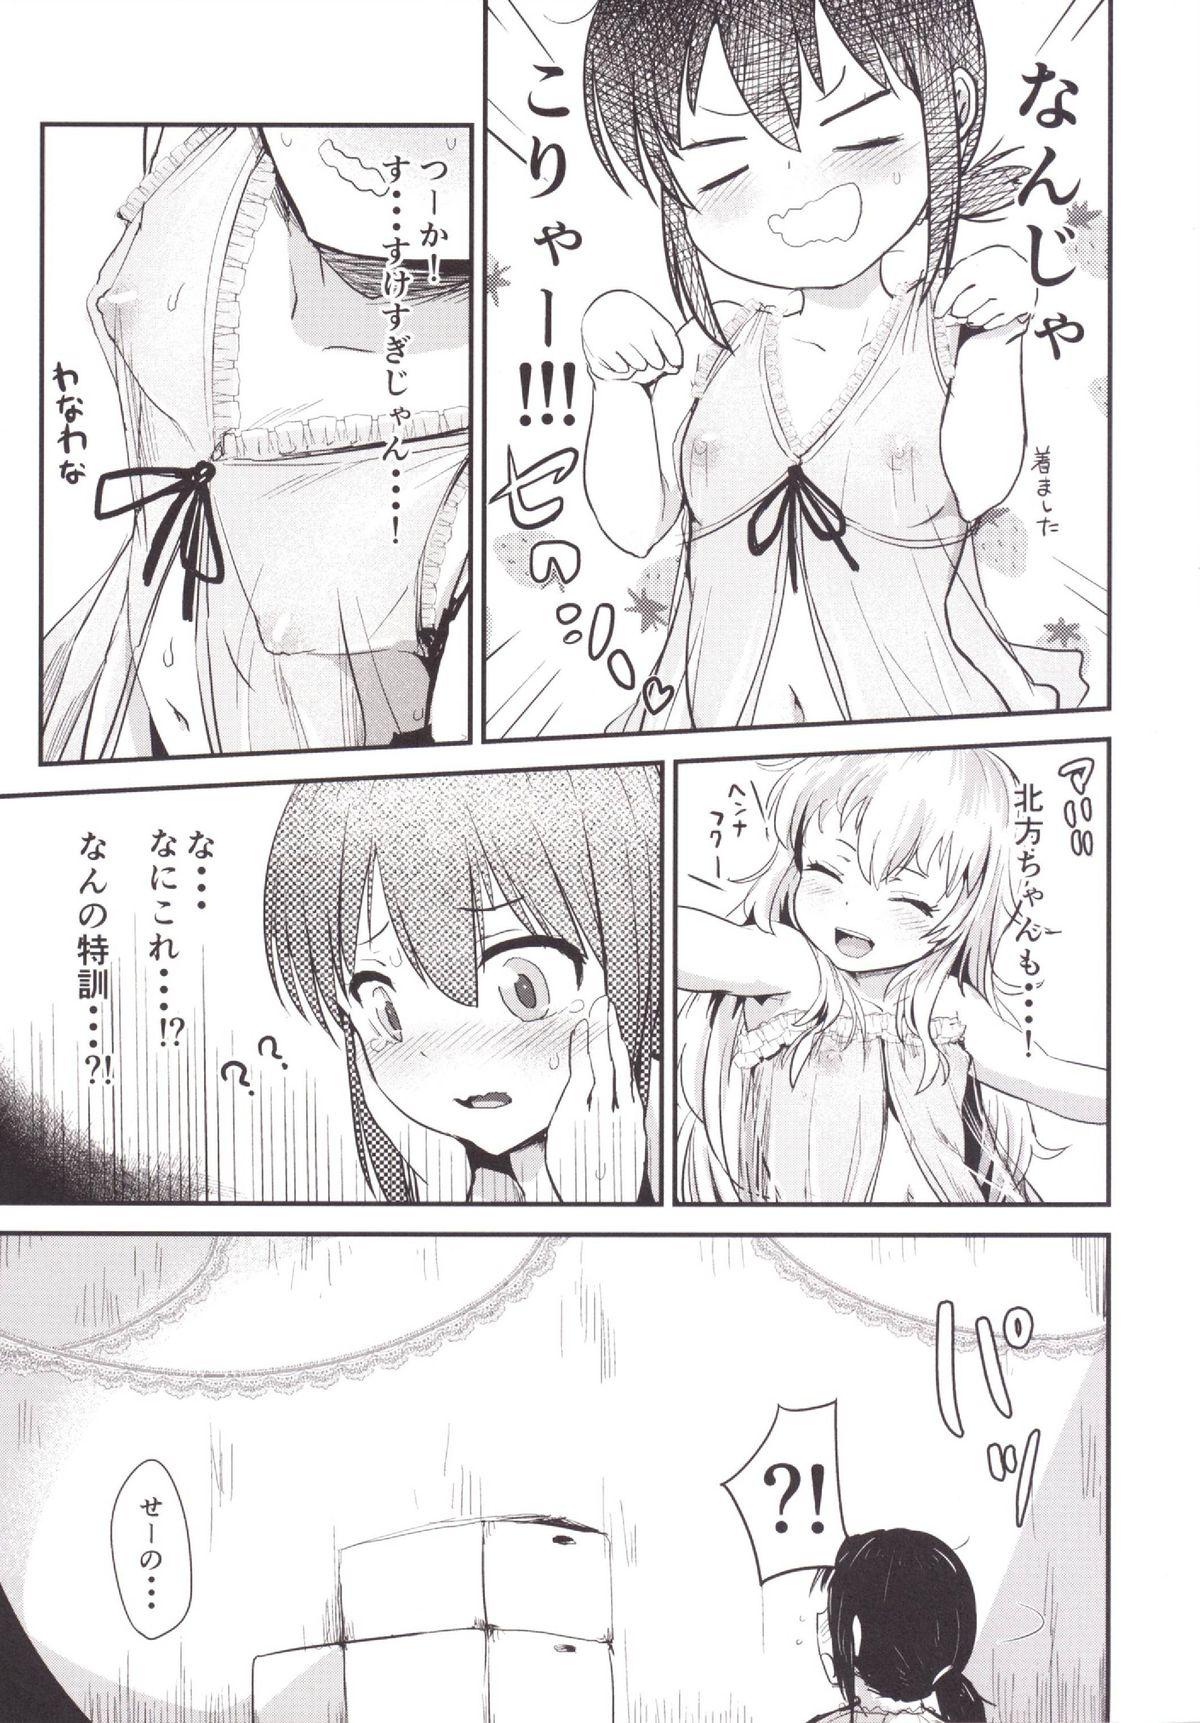 Bubble Butt Kuchikukan Loliloli Fuuzoku e Youkoso! - Welcome to the destroyer's sex party - Kantai collection Black Gay - Page 8